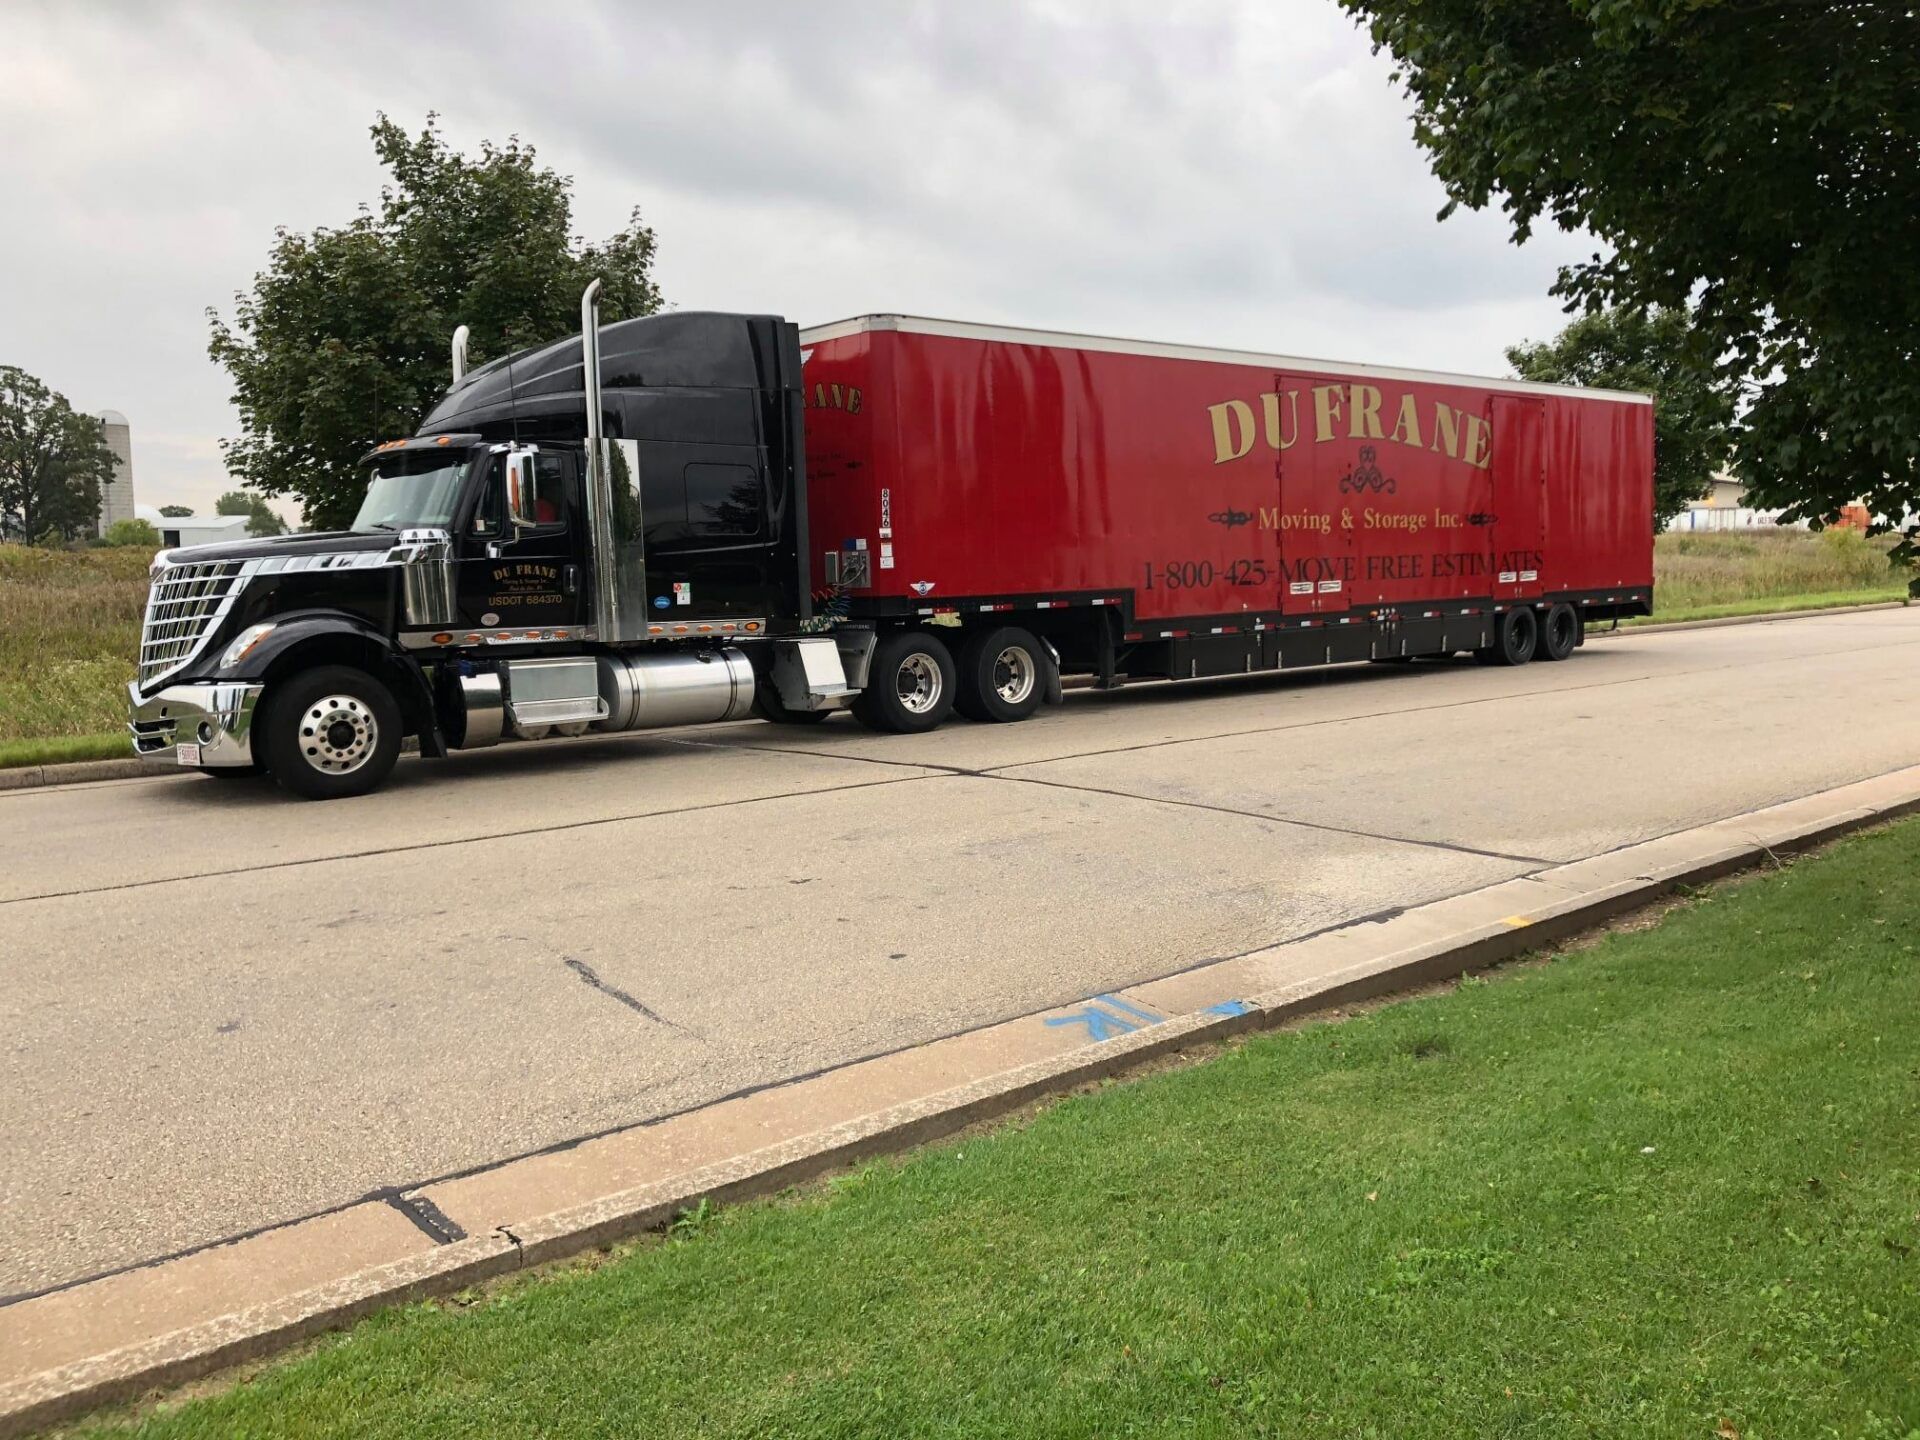 Driving a Freight Truck — Fond du Lac, WI — Du Frane Moving & Storage